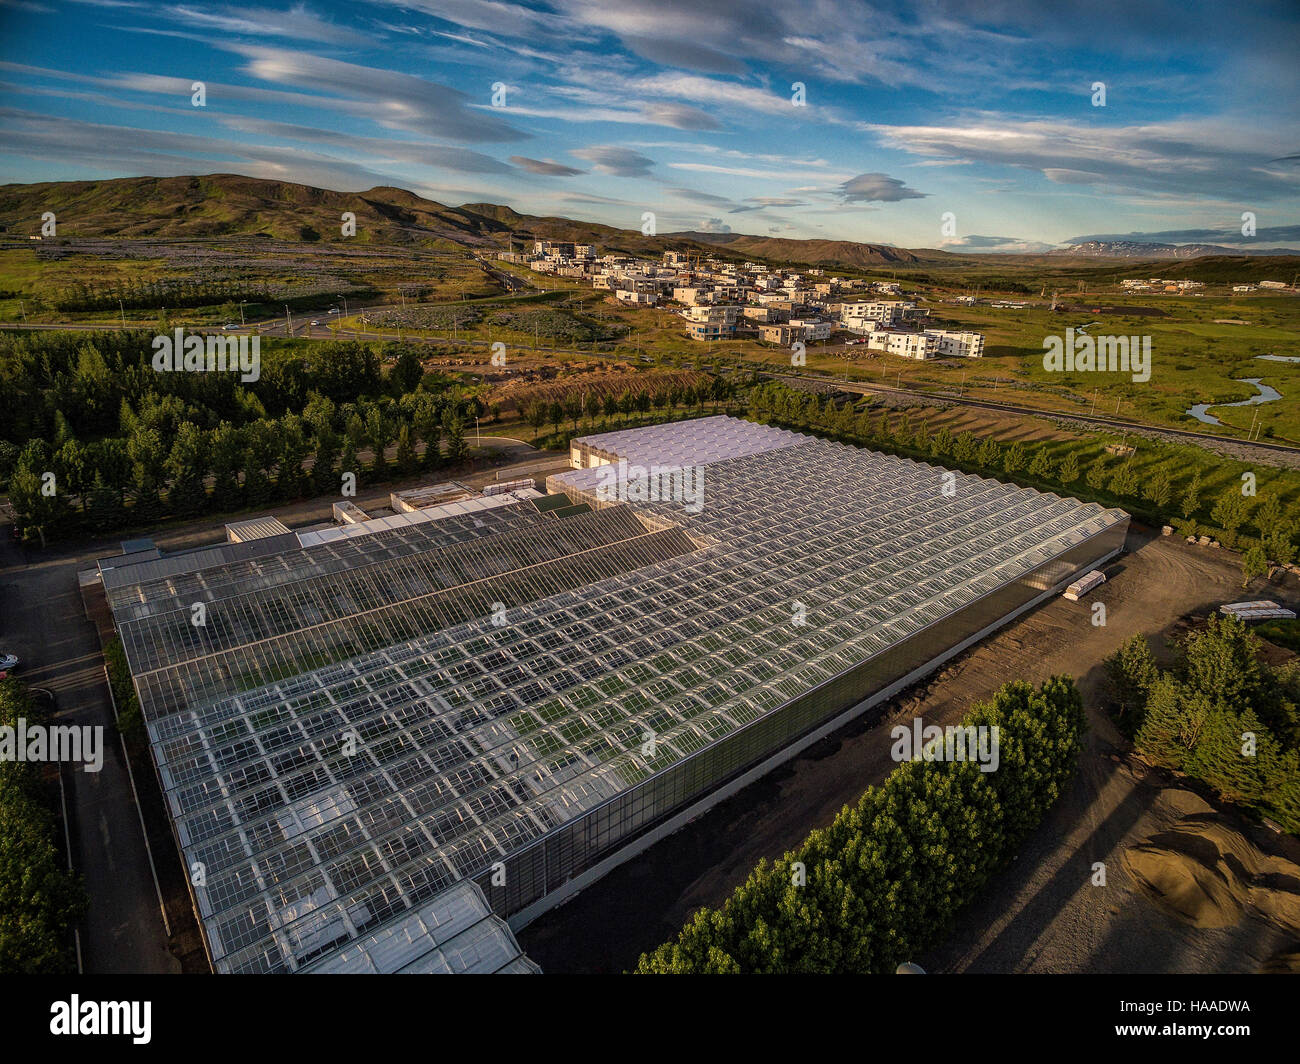 Top view of Greenhouses. These Greenhouses use geothermal energy, Reykjavik, Iceland. Image shot with a drone. Stock Photo